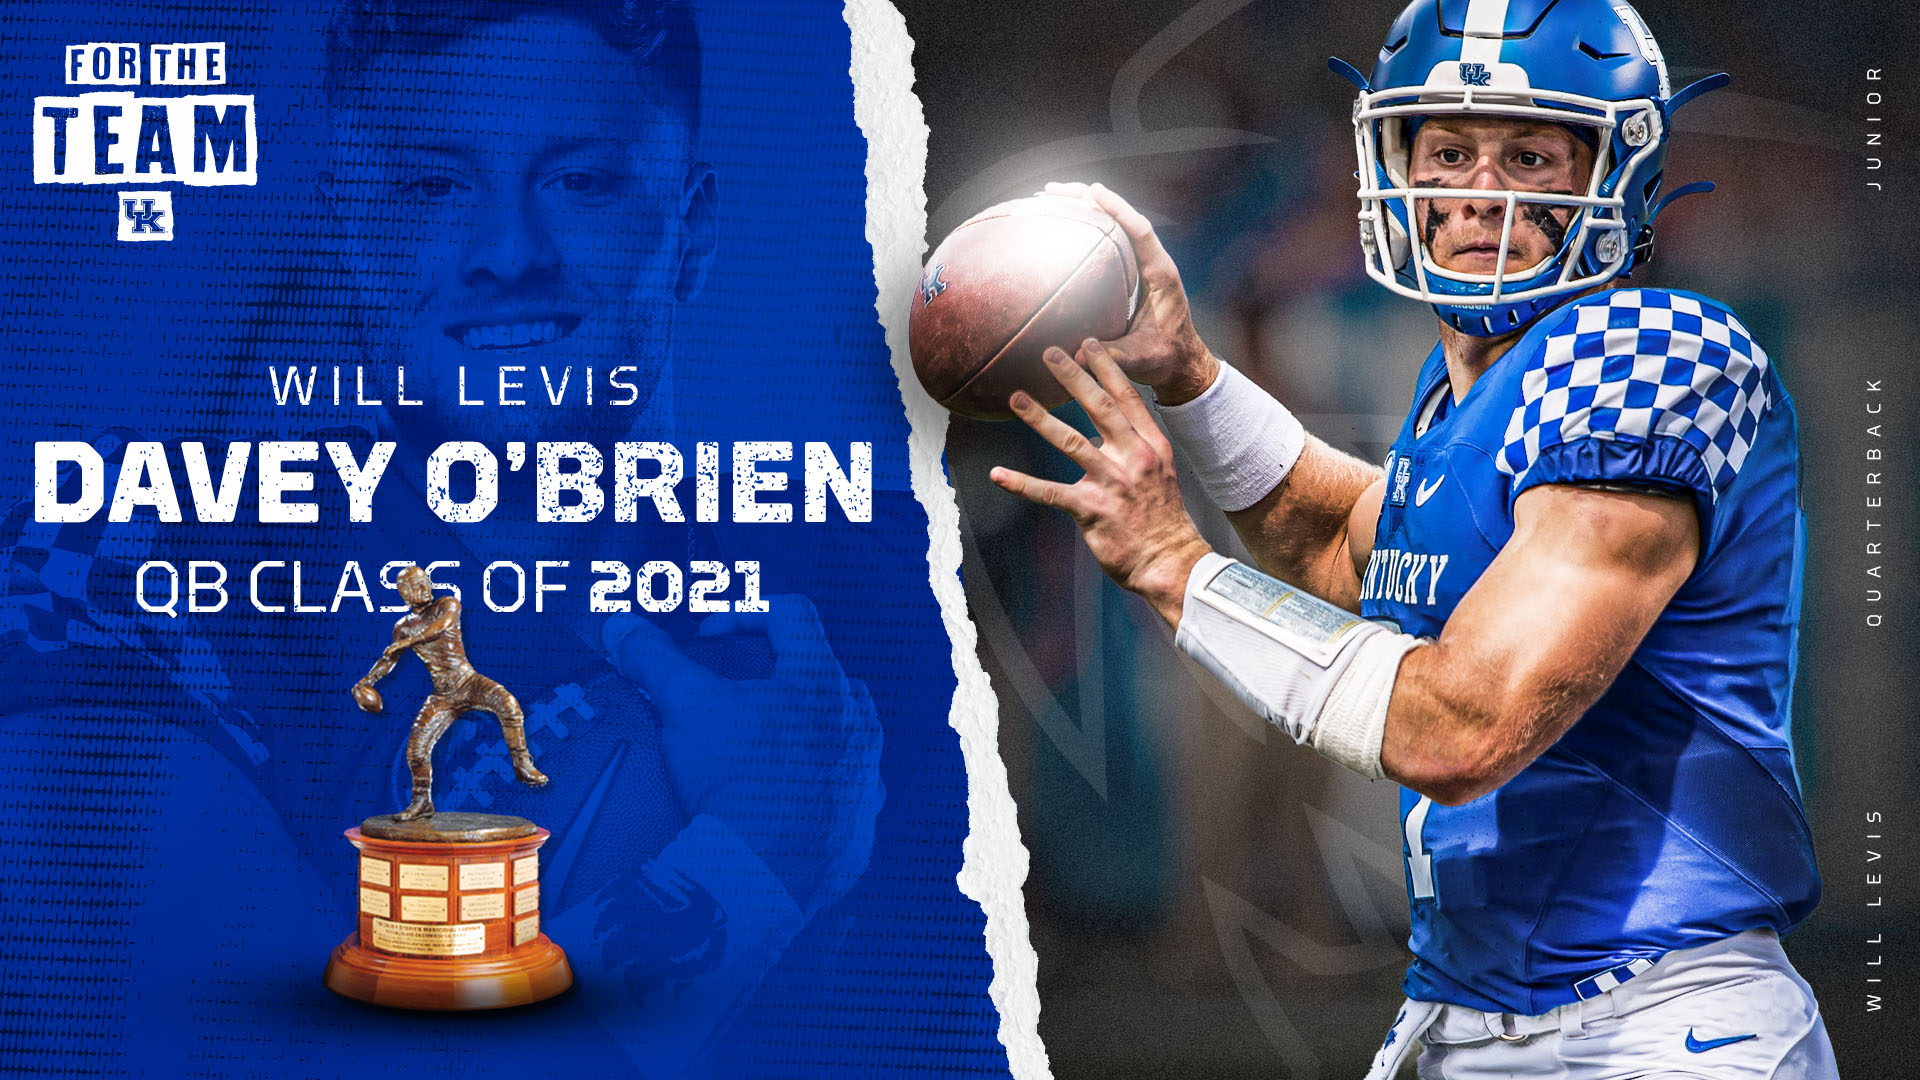 Will Levis Named to Davey O’Brien QB Class of 2021